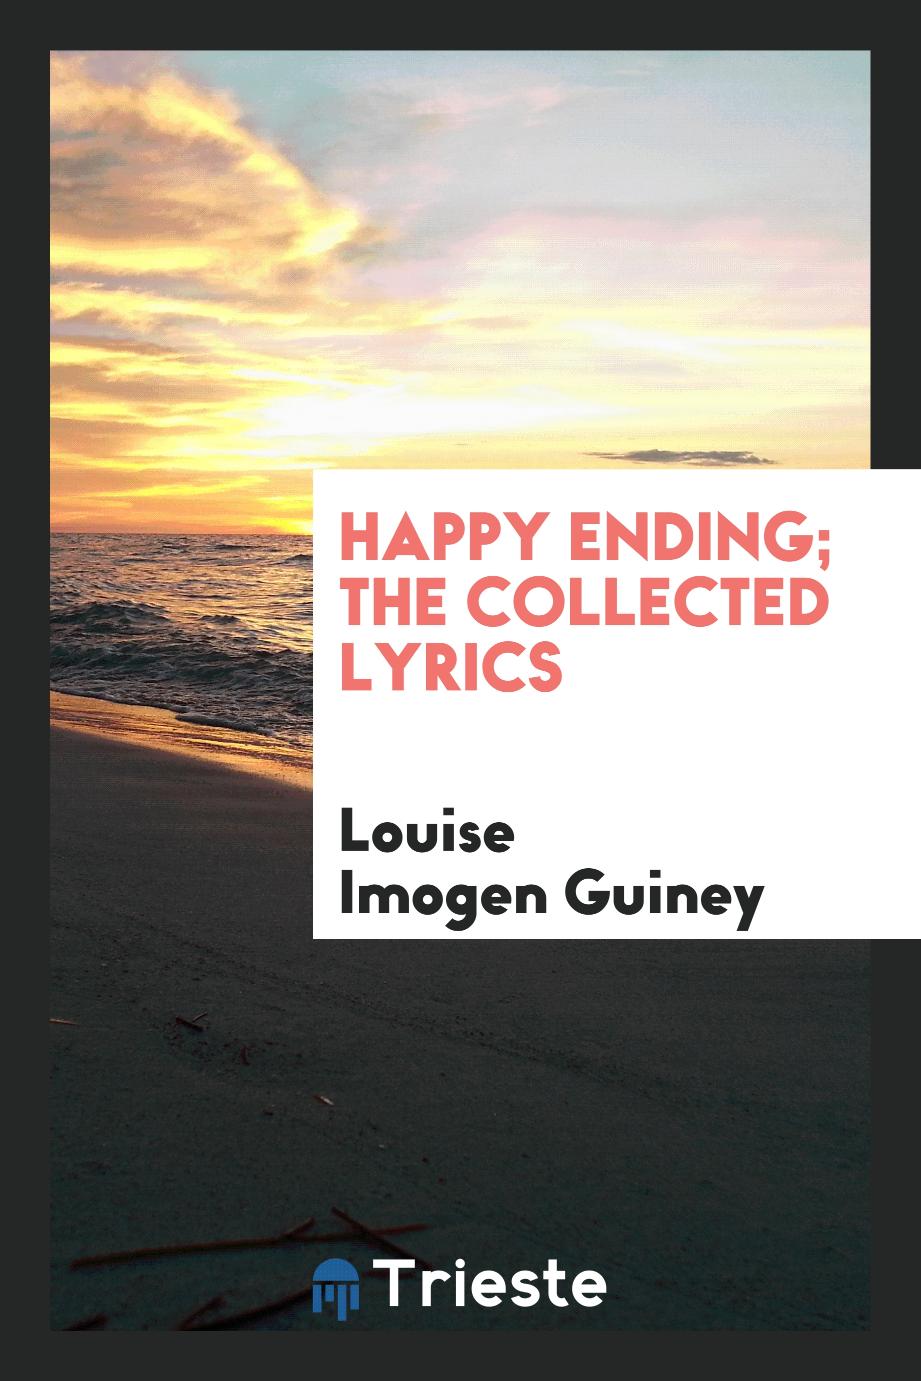 Happy ending; the collected lyrics